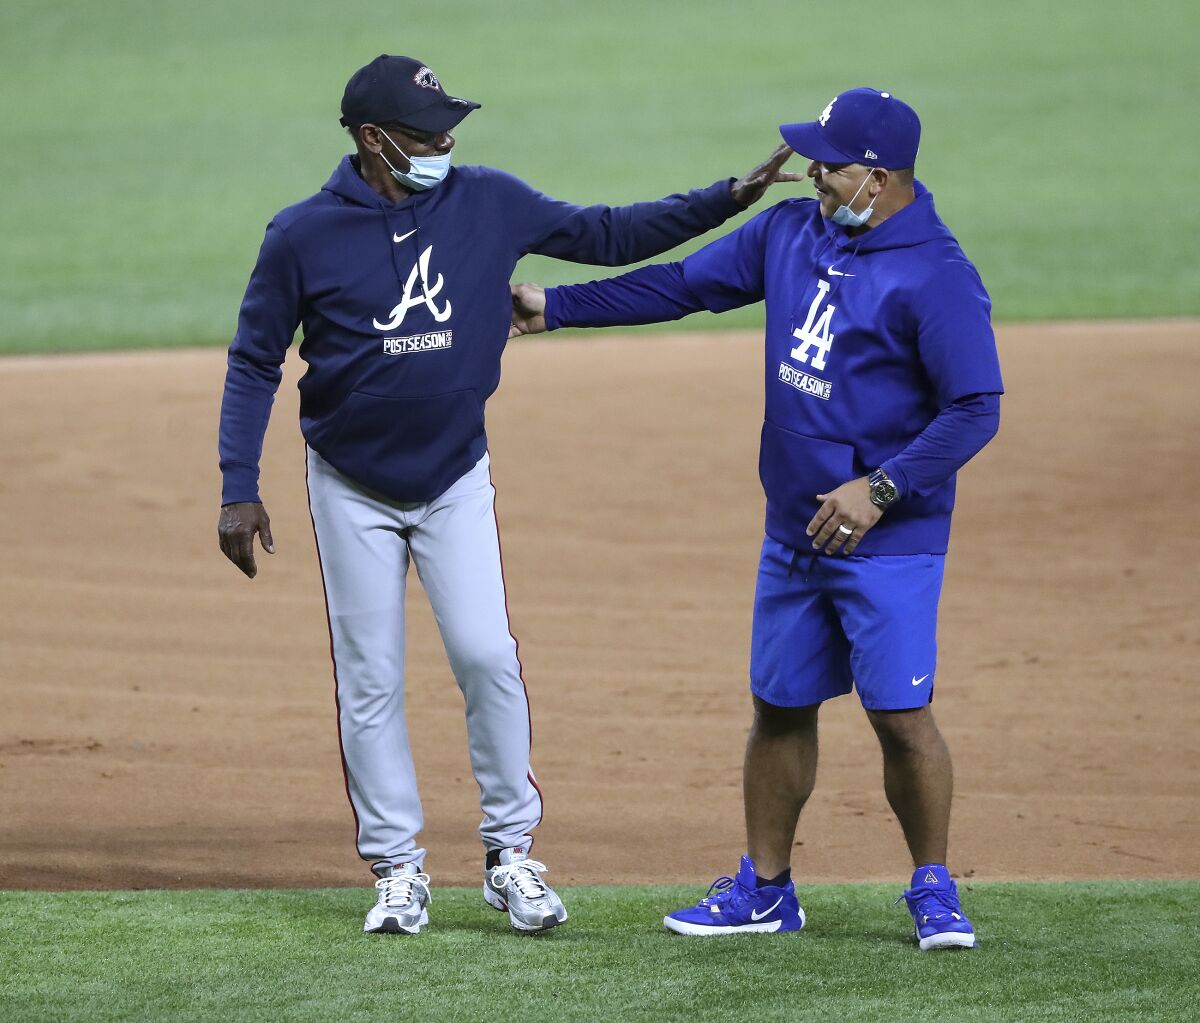 Atlanta Braves third base coach Ron Washington, left, and Los Angeles Dodgers manager Dave Roberts greet each other during team baseball workouts the day before facing in the best-of-seven National League Championship Series at Globe Life Field, Sunday, Oct. 11, 2020, in Arlington. (Curtis Compton/Atlanta Journal-Constitution via AP)